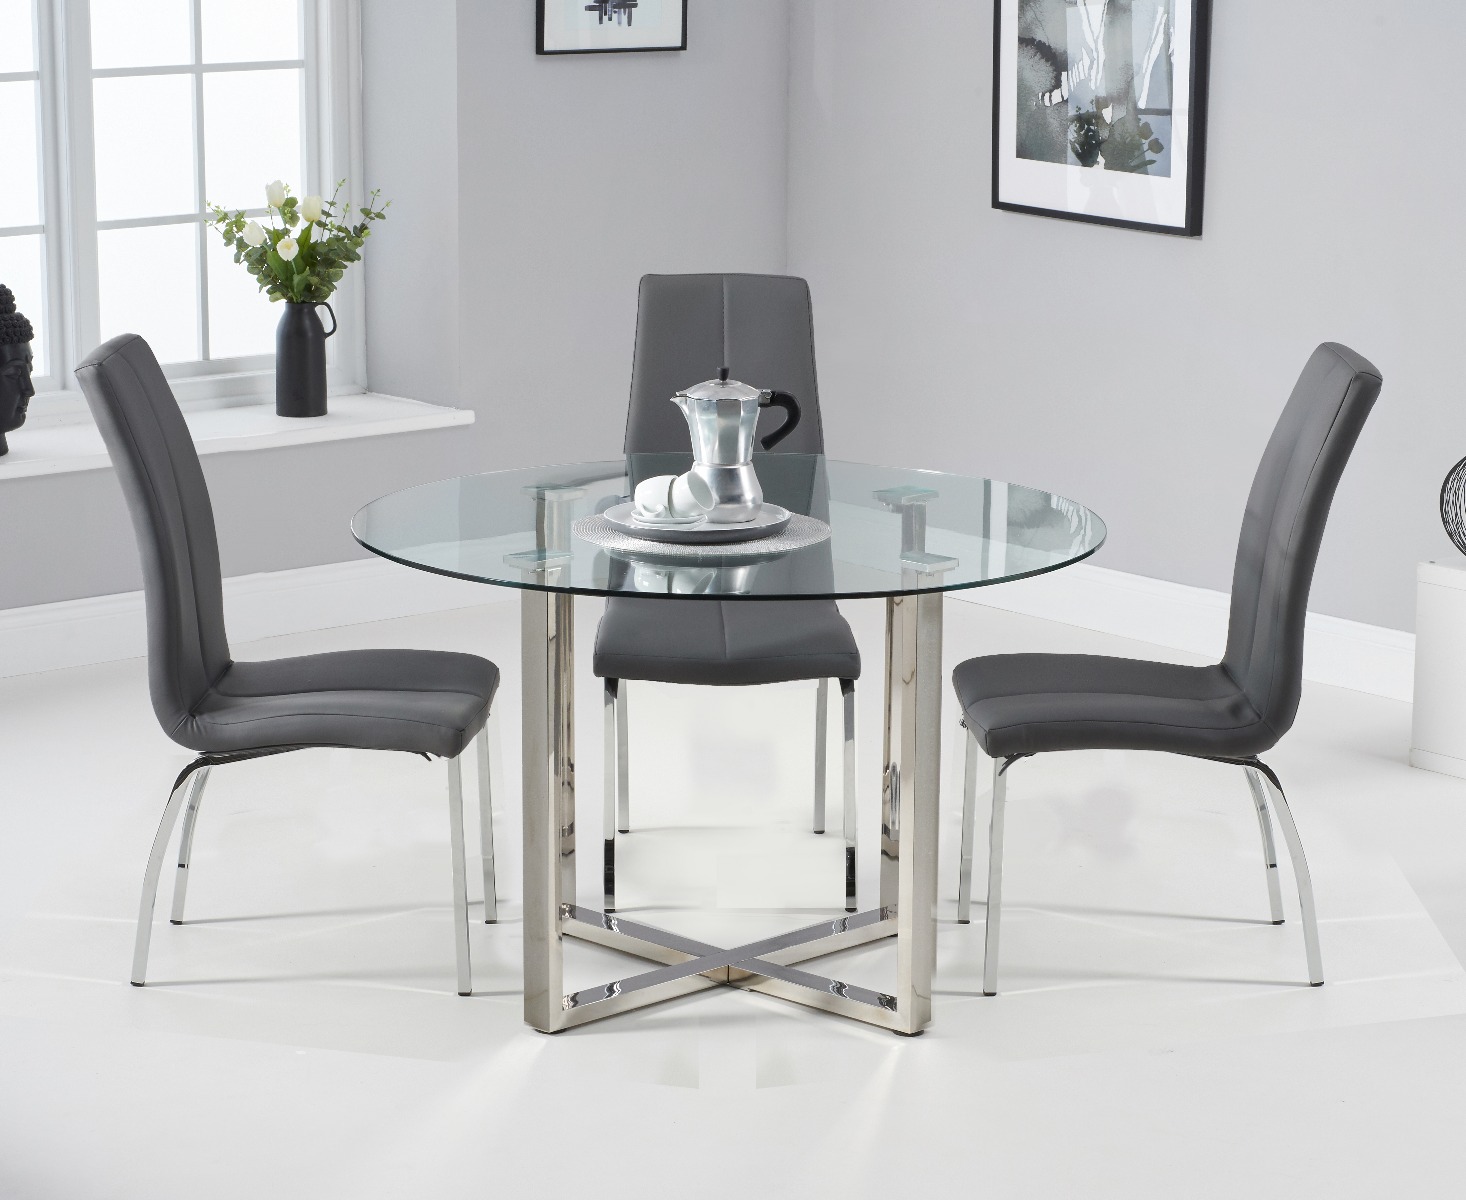 Vaso 120cm Round Glass Dining Table With 4 Grey Marco Chairs